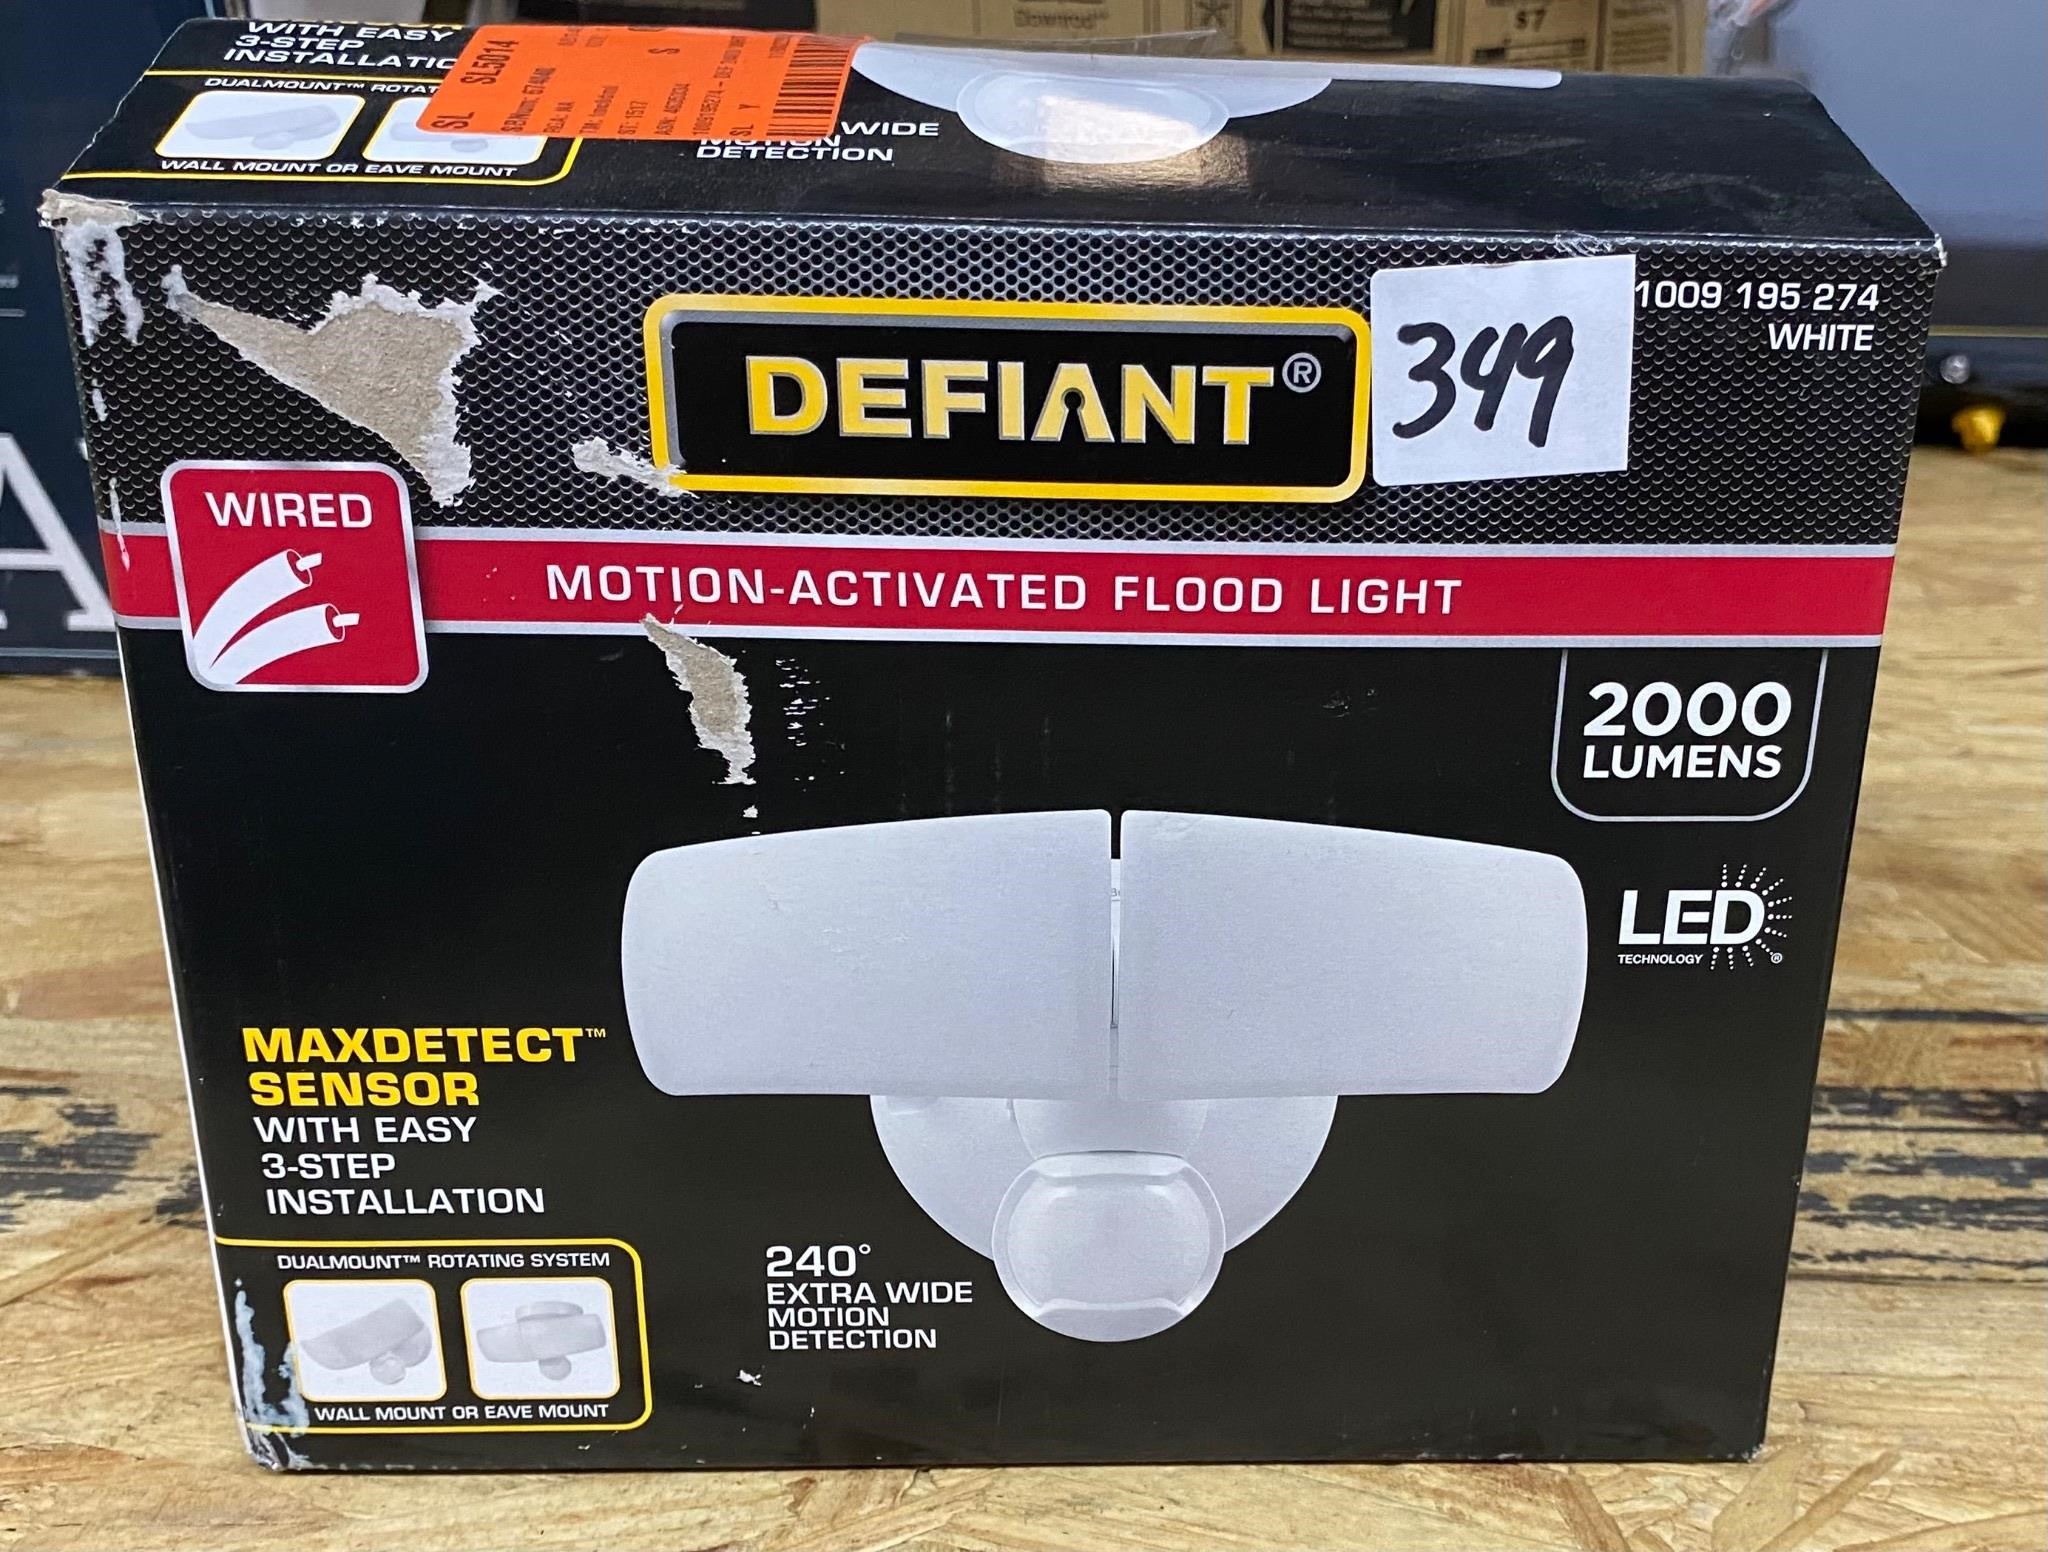 Defiant Motion Activated Wired Flood Light